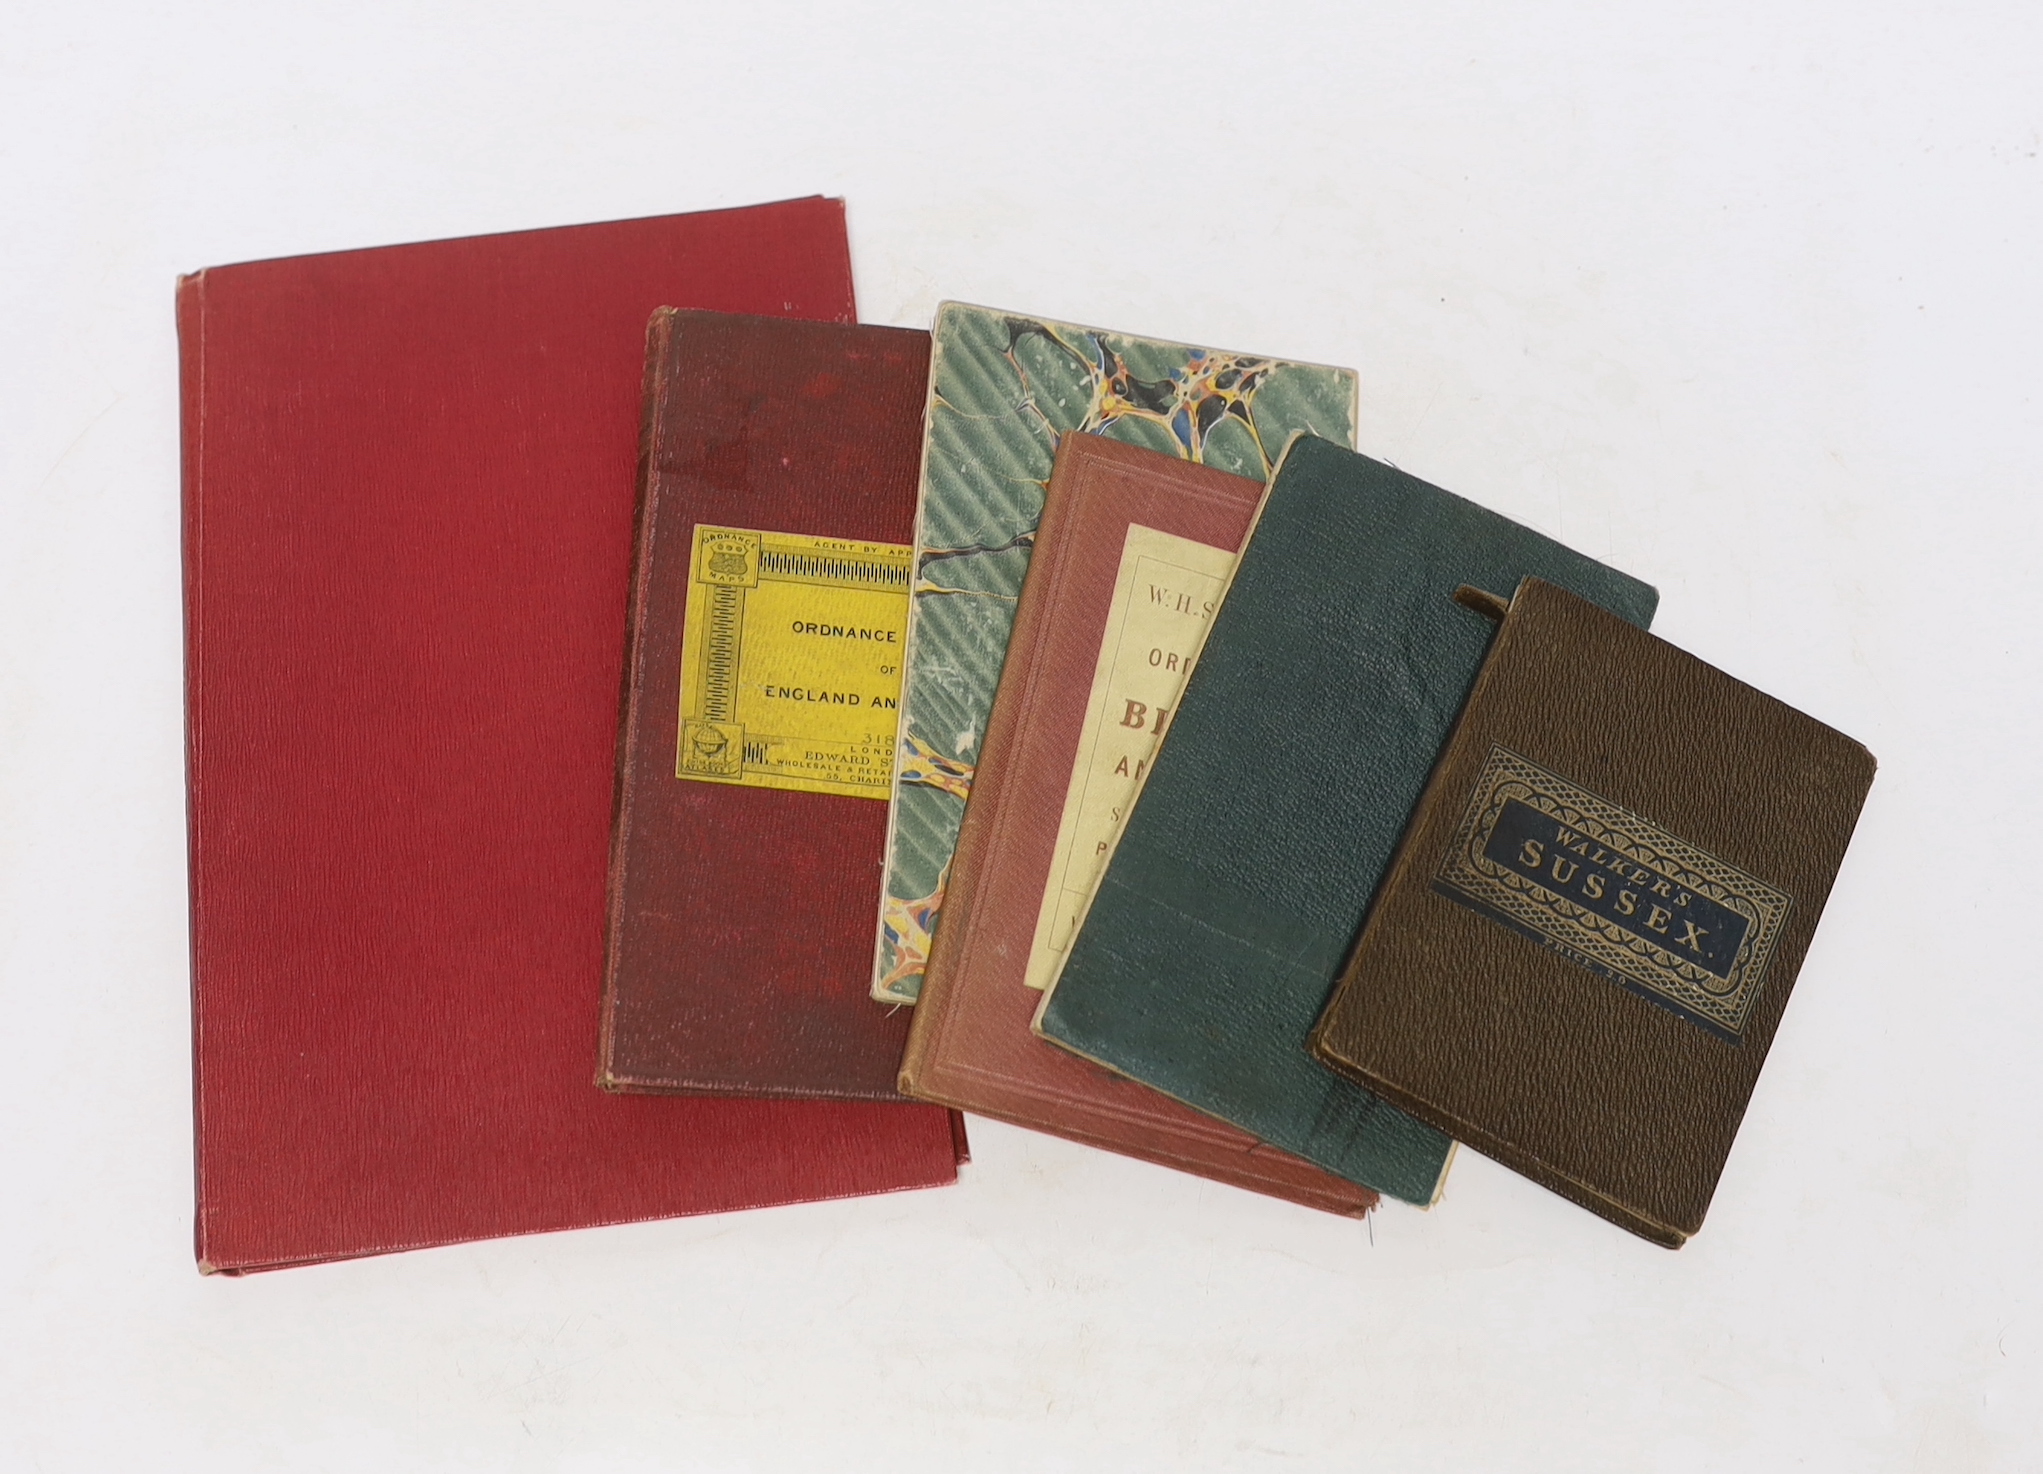 Six 19th and 20th century folding maps of Sussex; an Ordnance Survey (318), a W.H. Smith & Son map, a Smith & Son 172 Strand 1864, two Walker’s County Maps, and a Kelly’s Map                                              